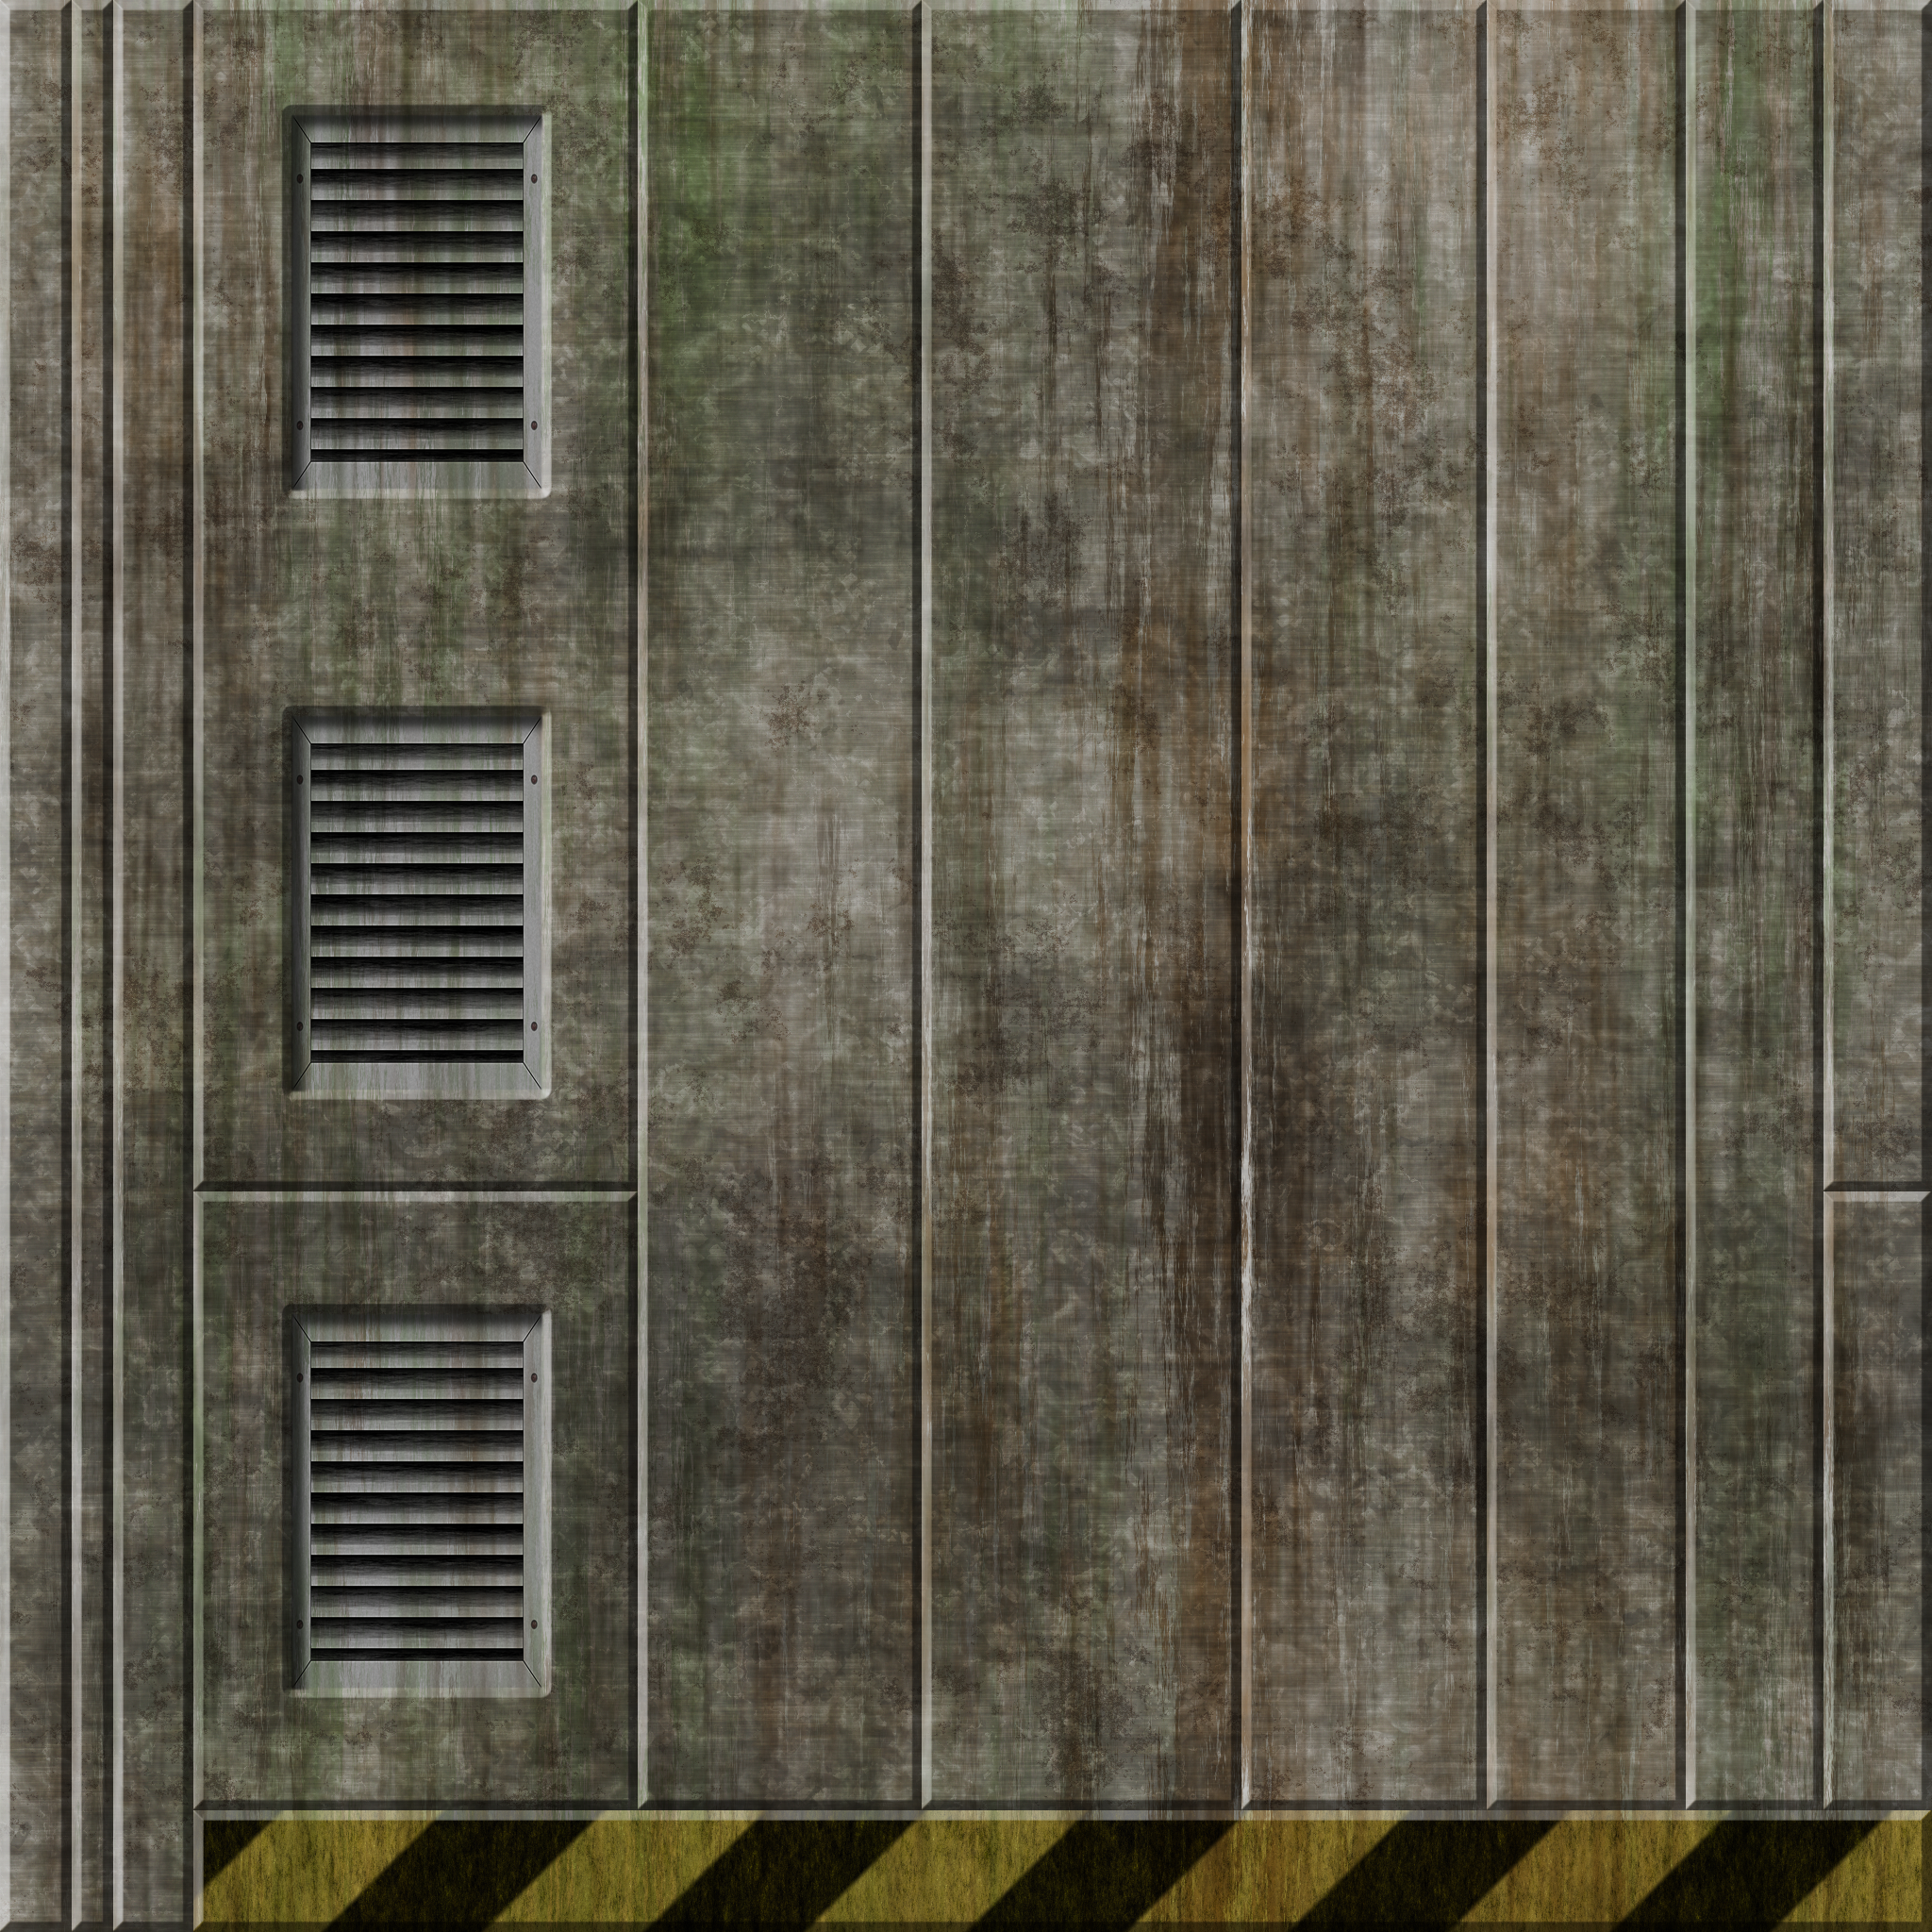 cement_wall_3_remake_by_hoover1979-dar1ewd.png